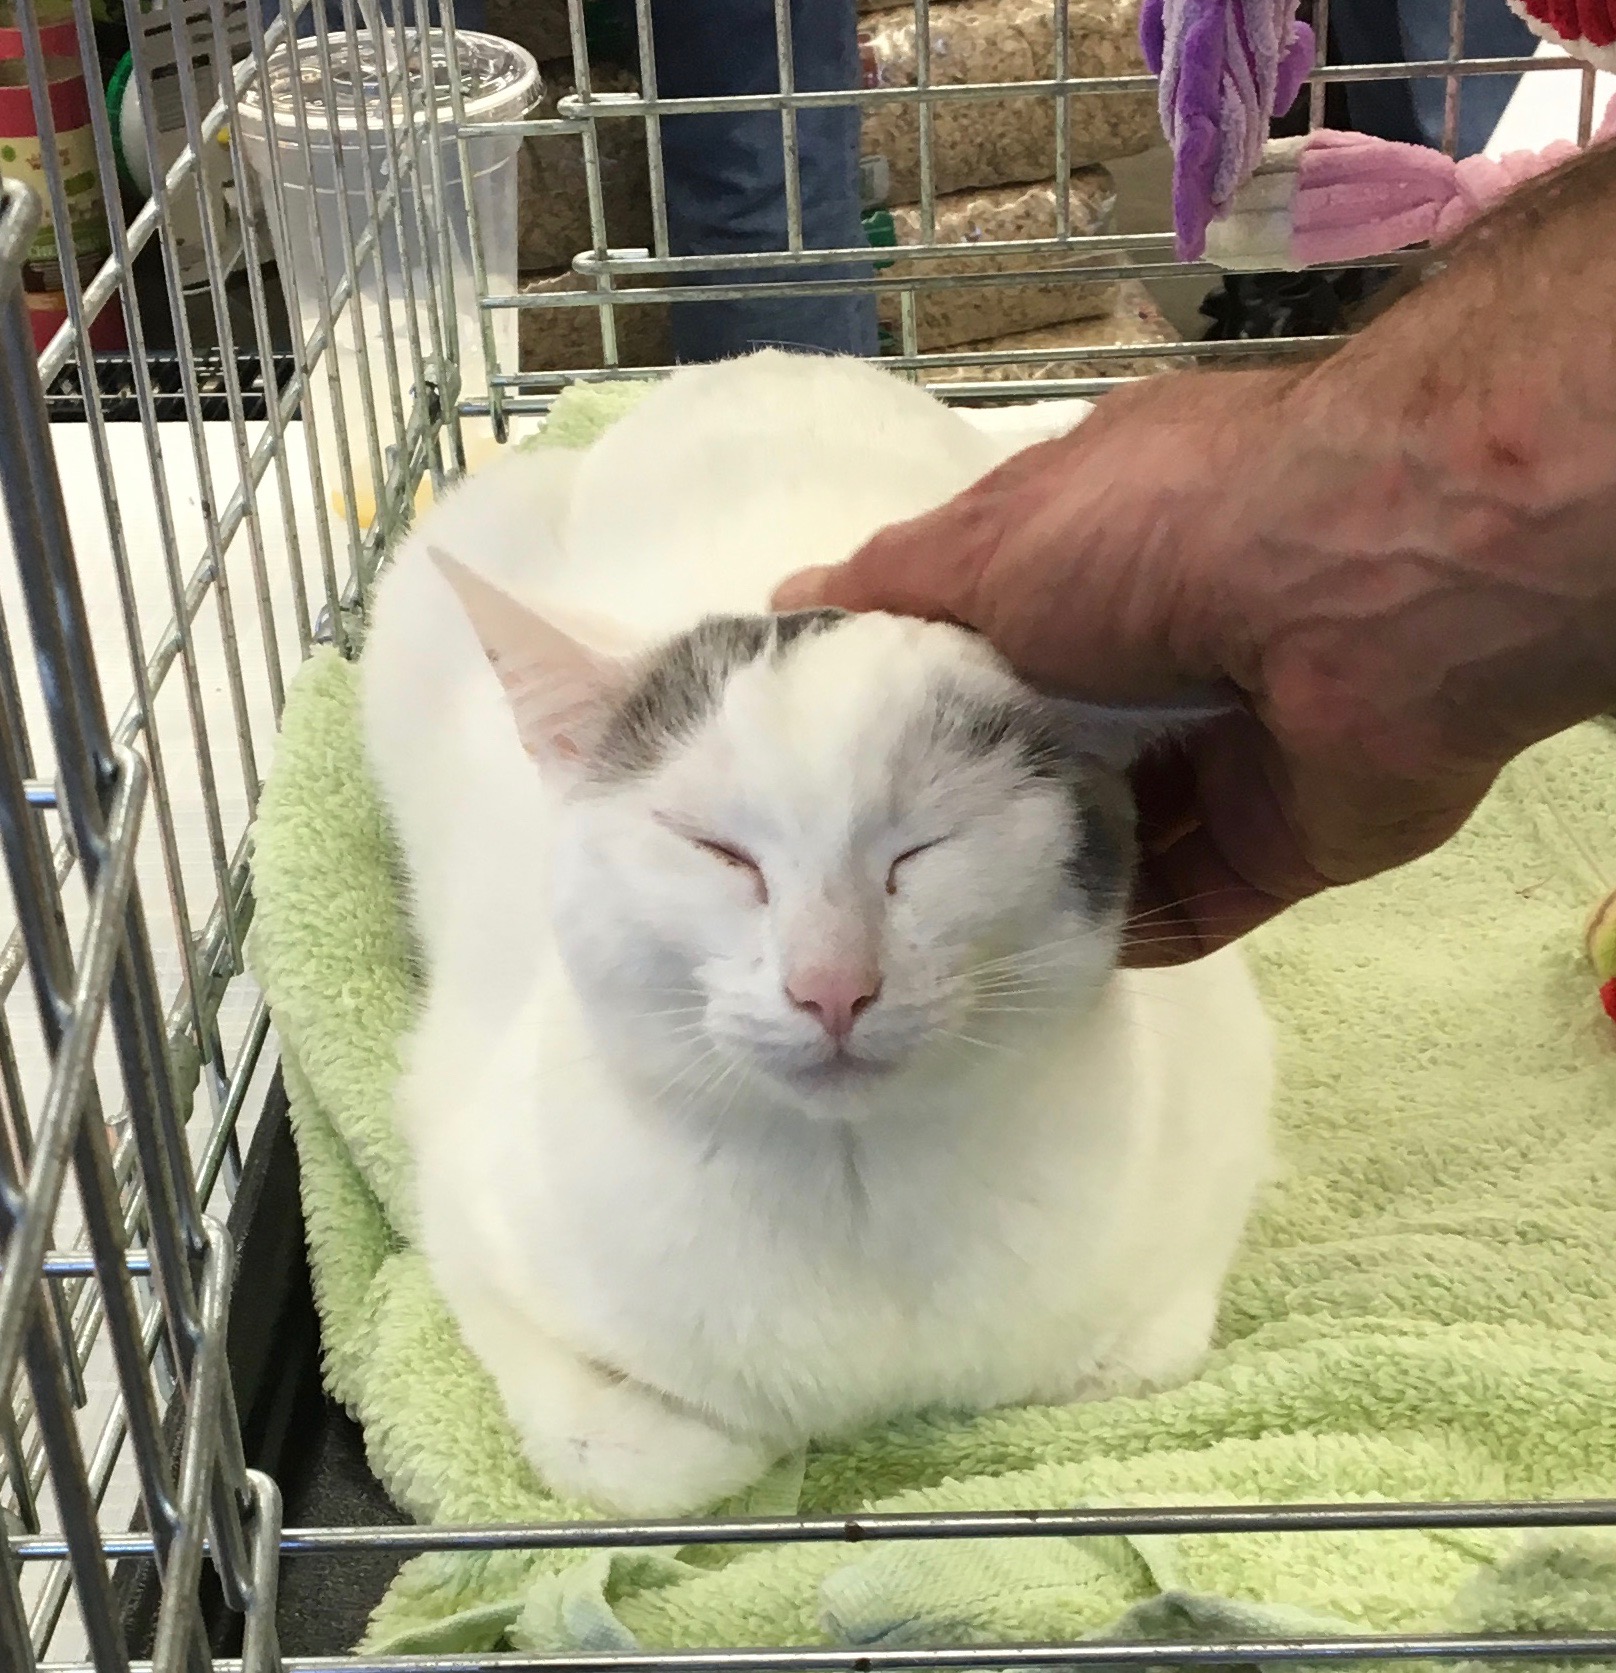 White Cat With Grey Patches And Pink Nose Sitting In Cage And Being Petted